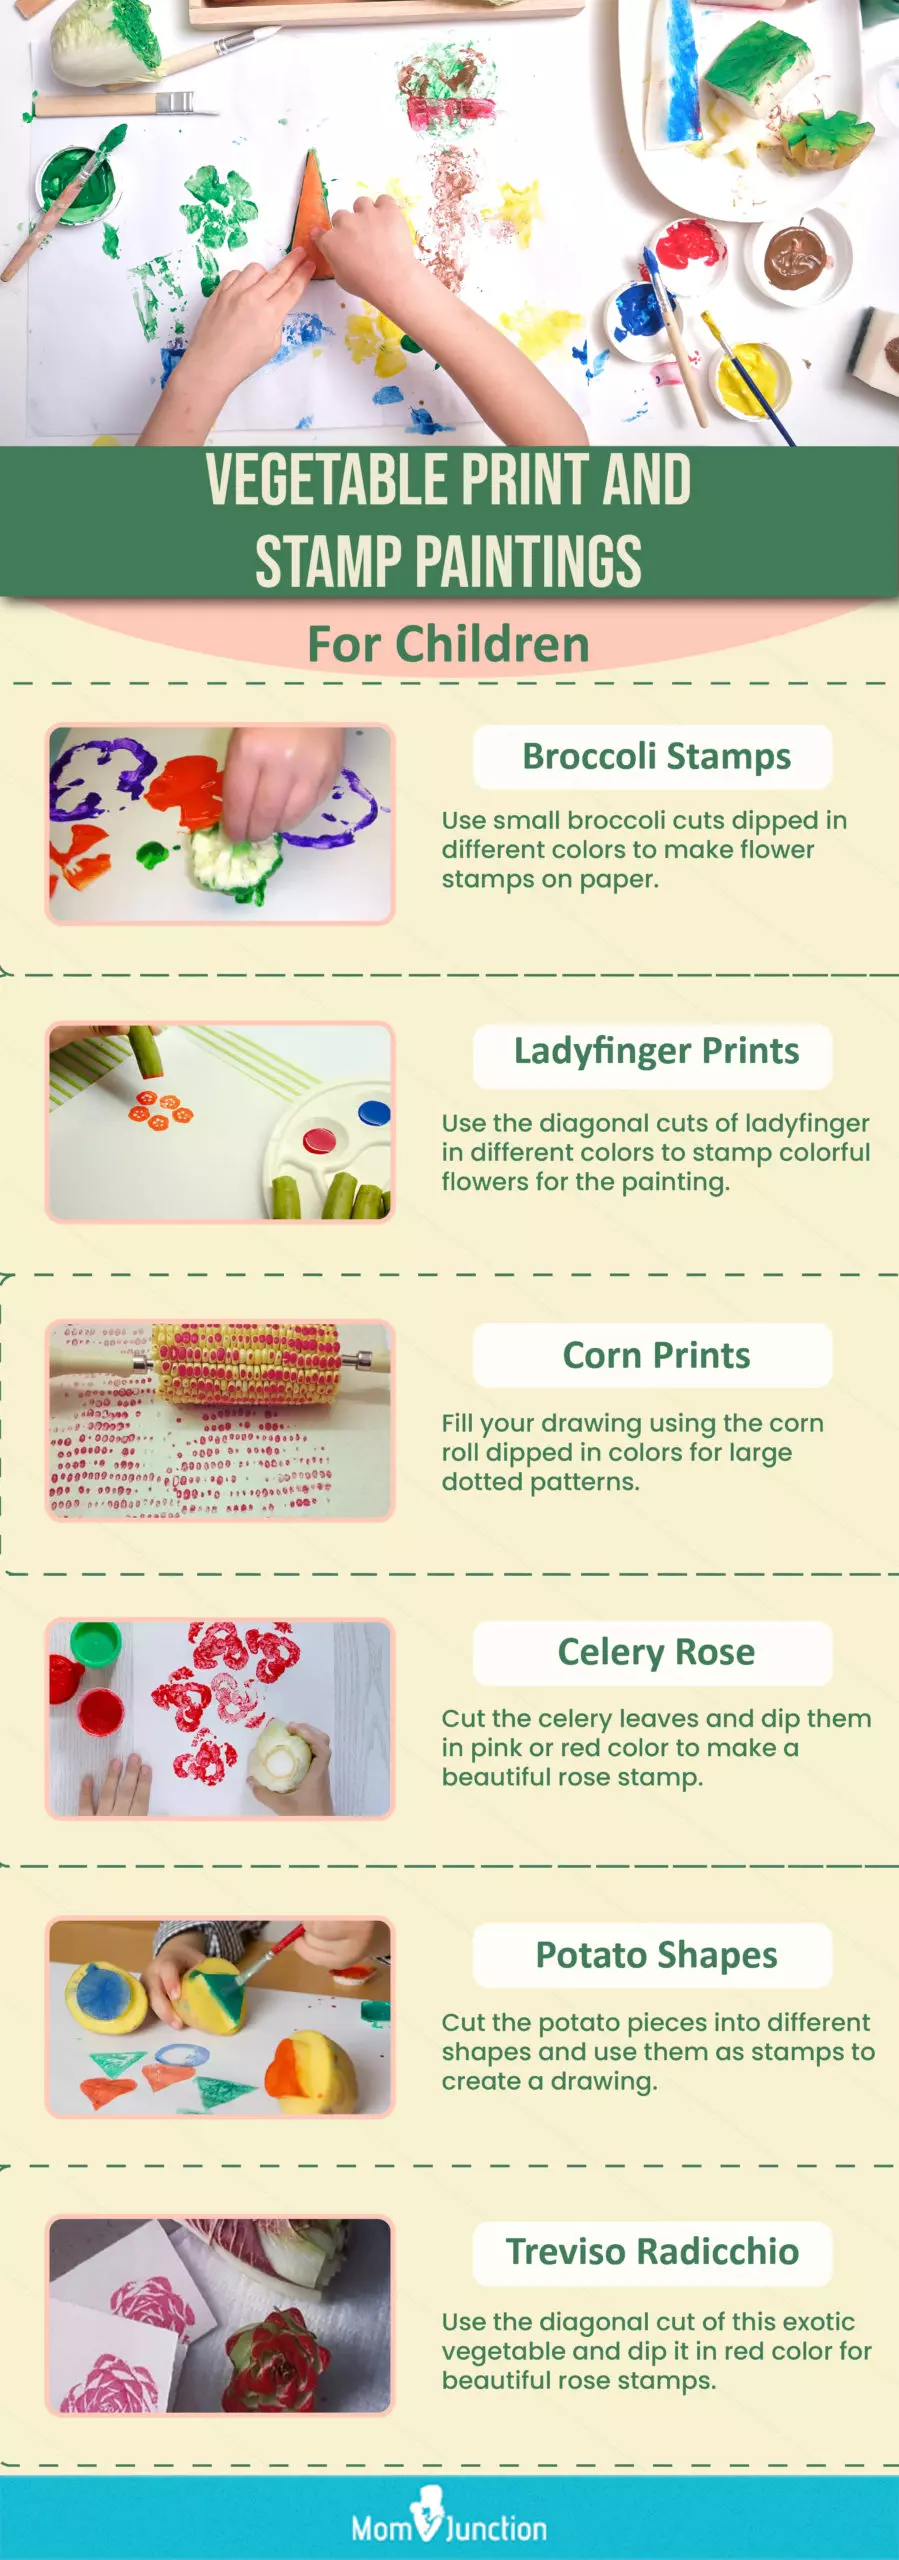 vegetable stamp paintings for children (infographic)